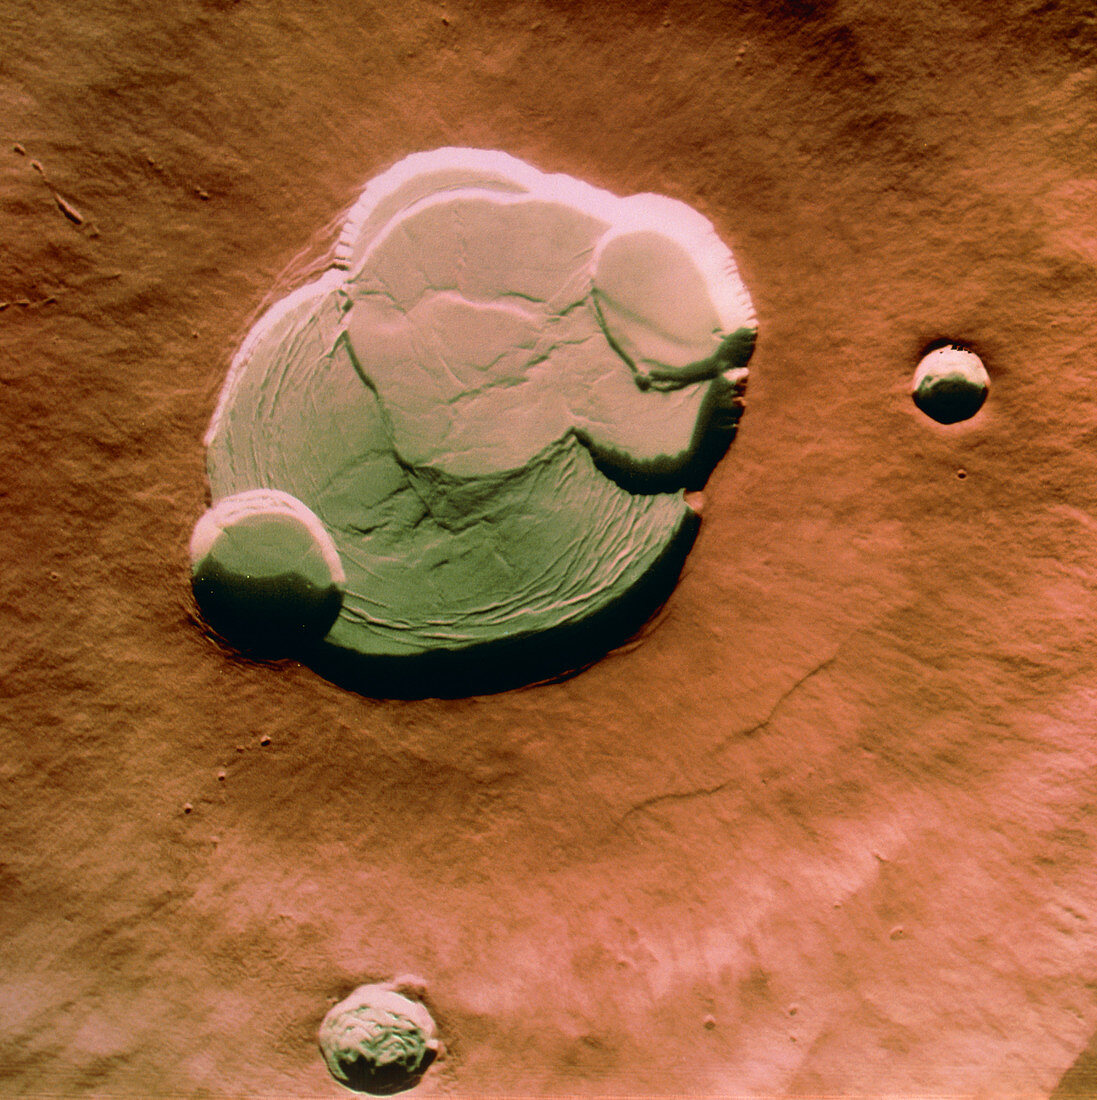 Coloured view of caldera of Olympus Mons on Mars